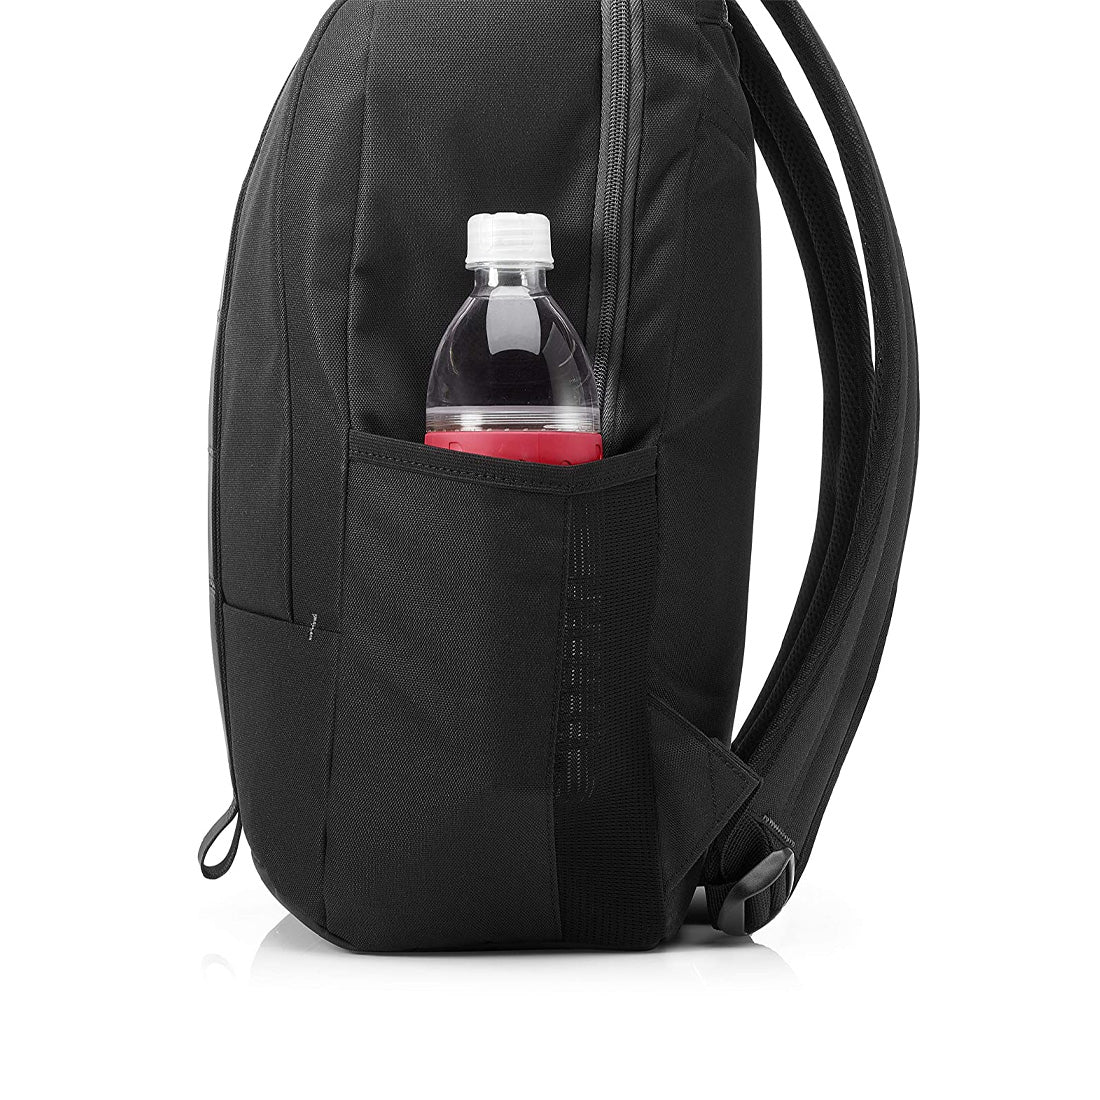 HP Commuter Backpack for Laptops up to 15.6 Inches with Water Resistant Base